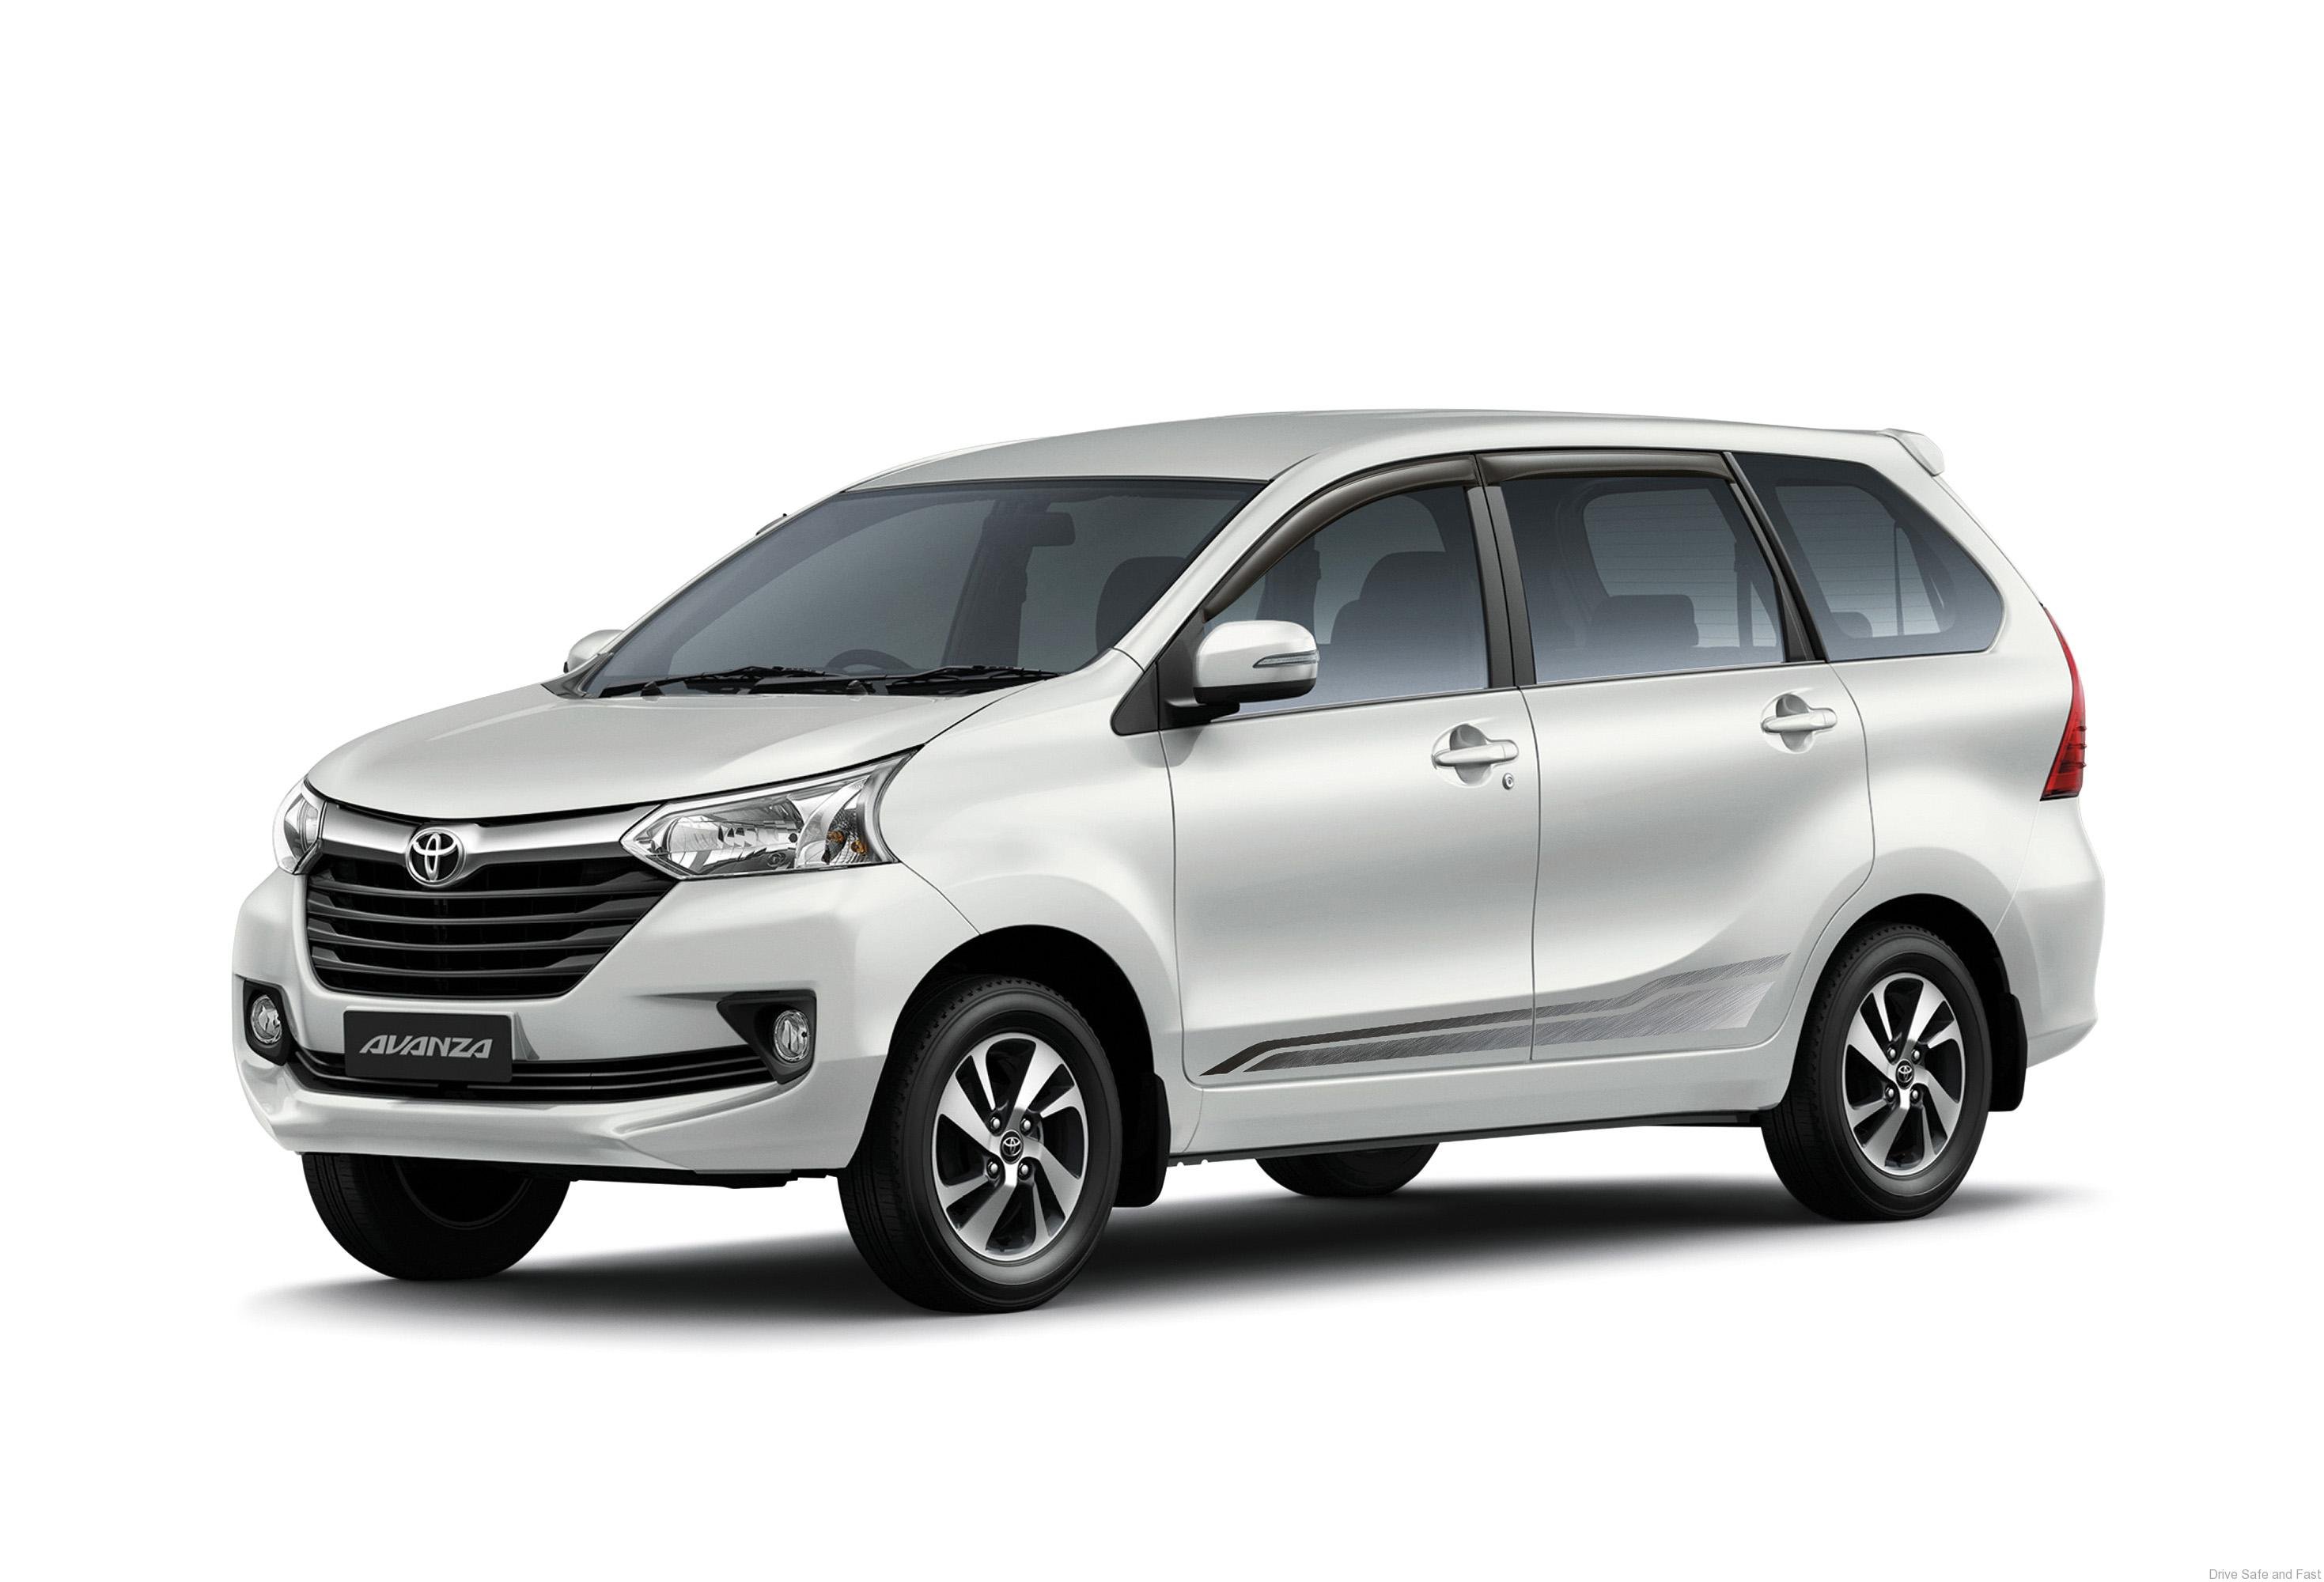 New Toyota Avanza Brings Big Improvements – Drive Safe and Fast